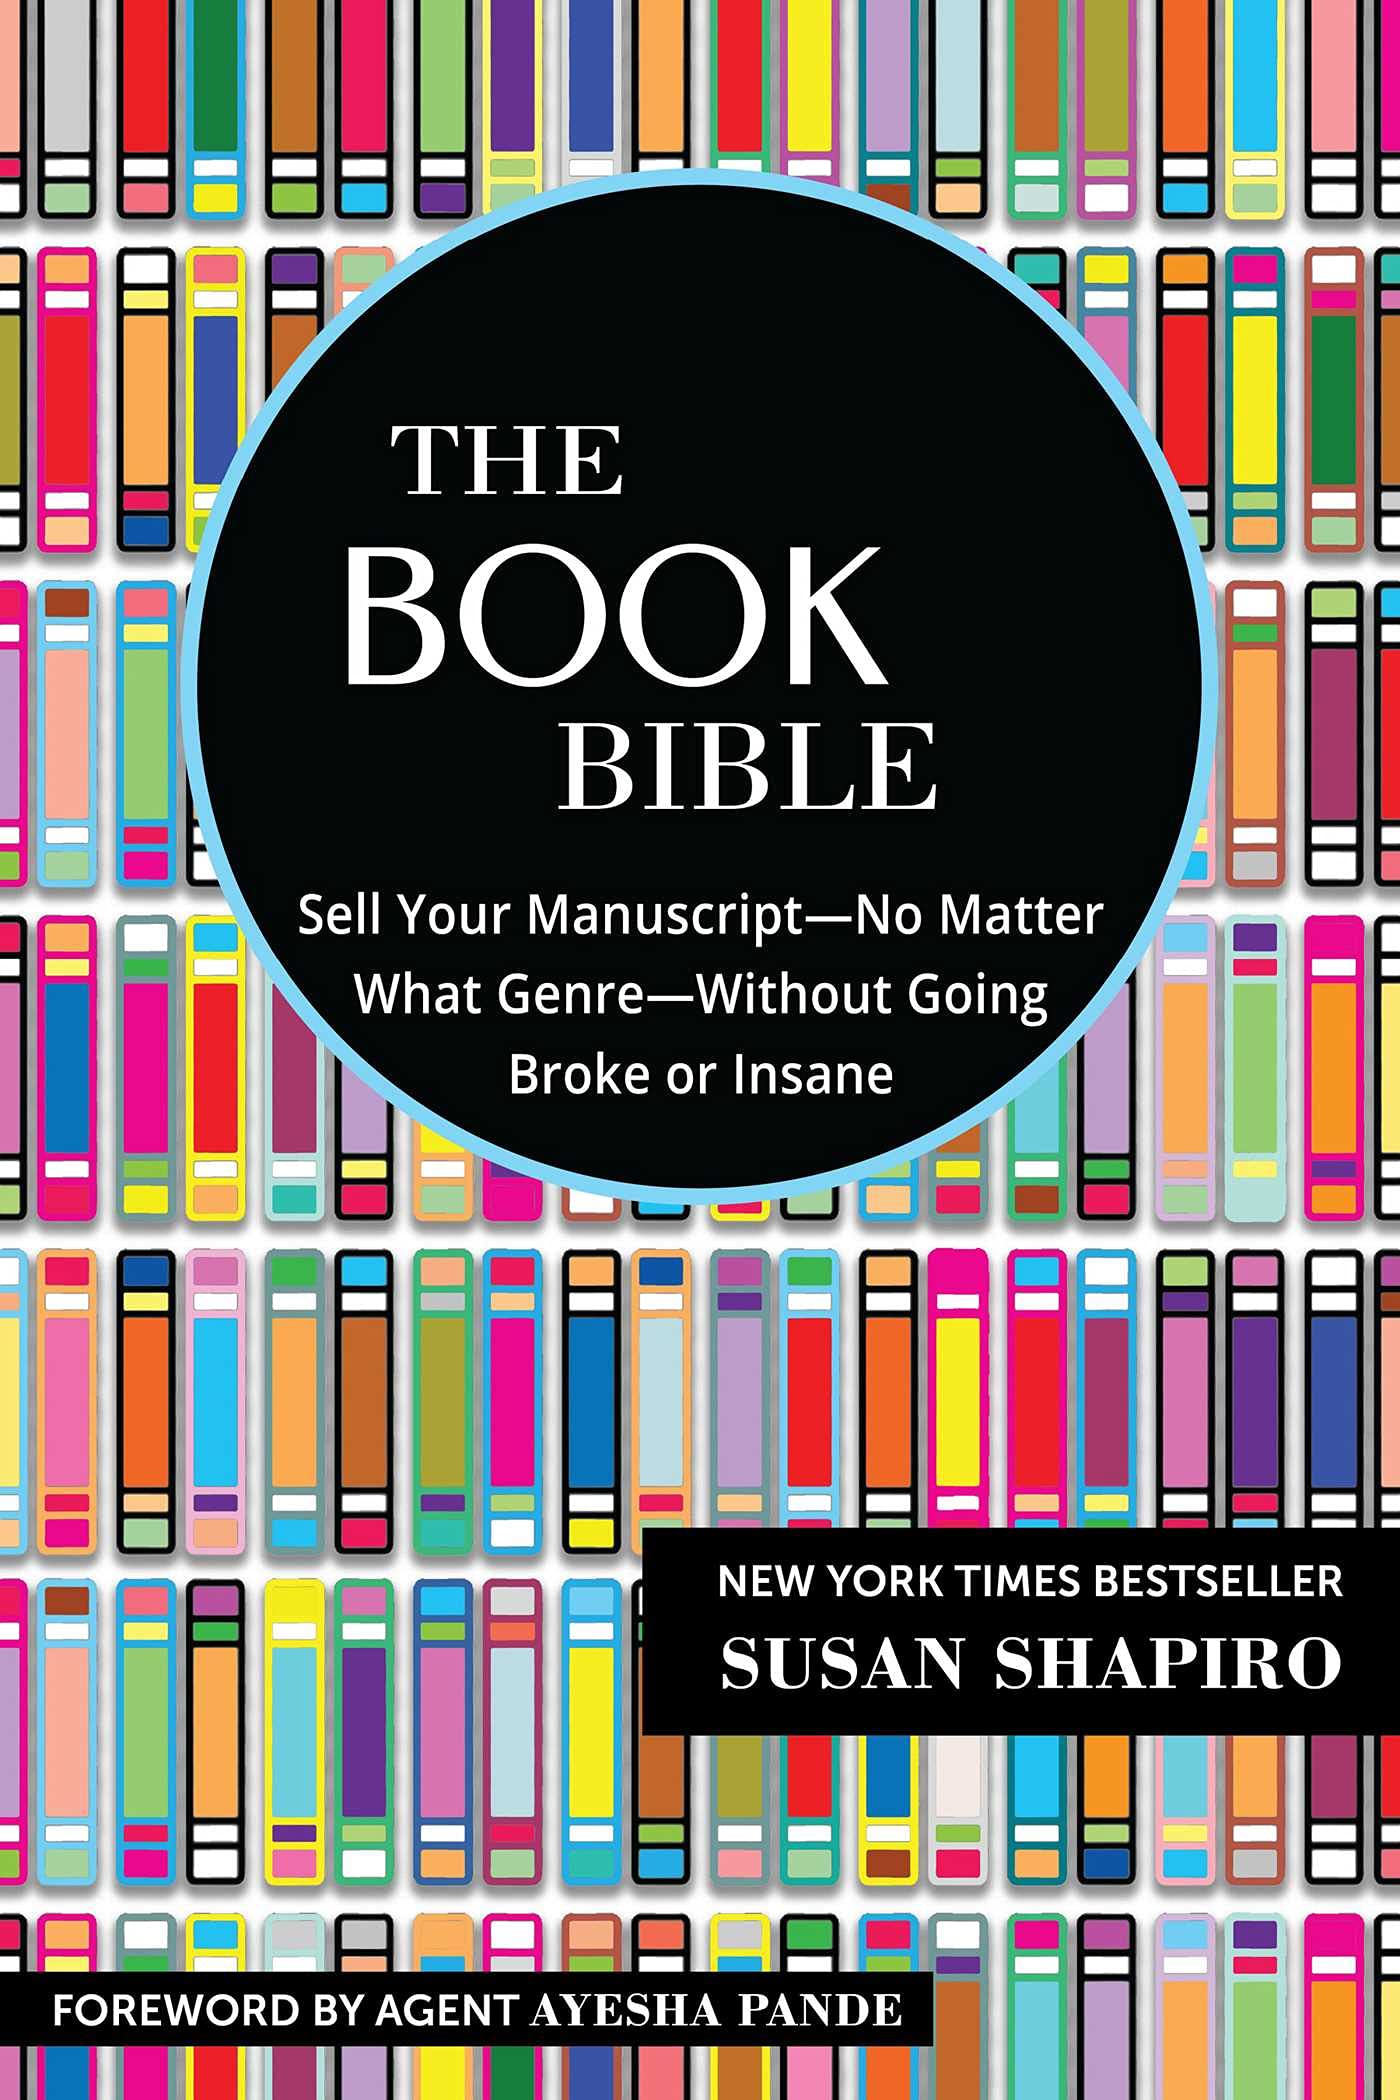 The Book Bible: How to Sell Your Manuscript―No Matter What Genre―Without Going Broke or Insane - SureShot Books Publishing LLC